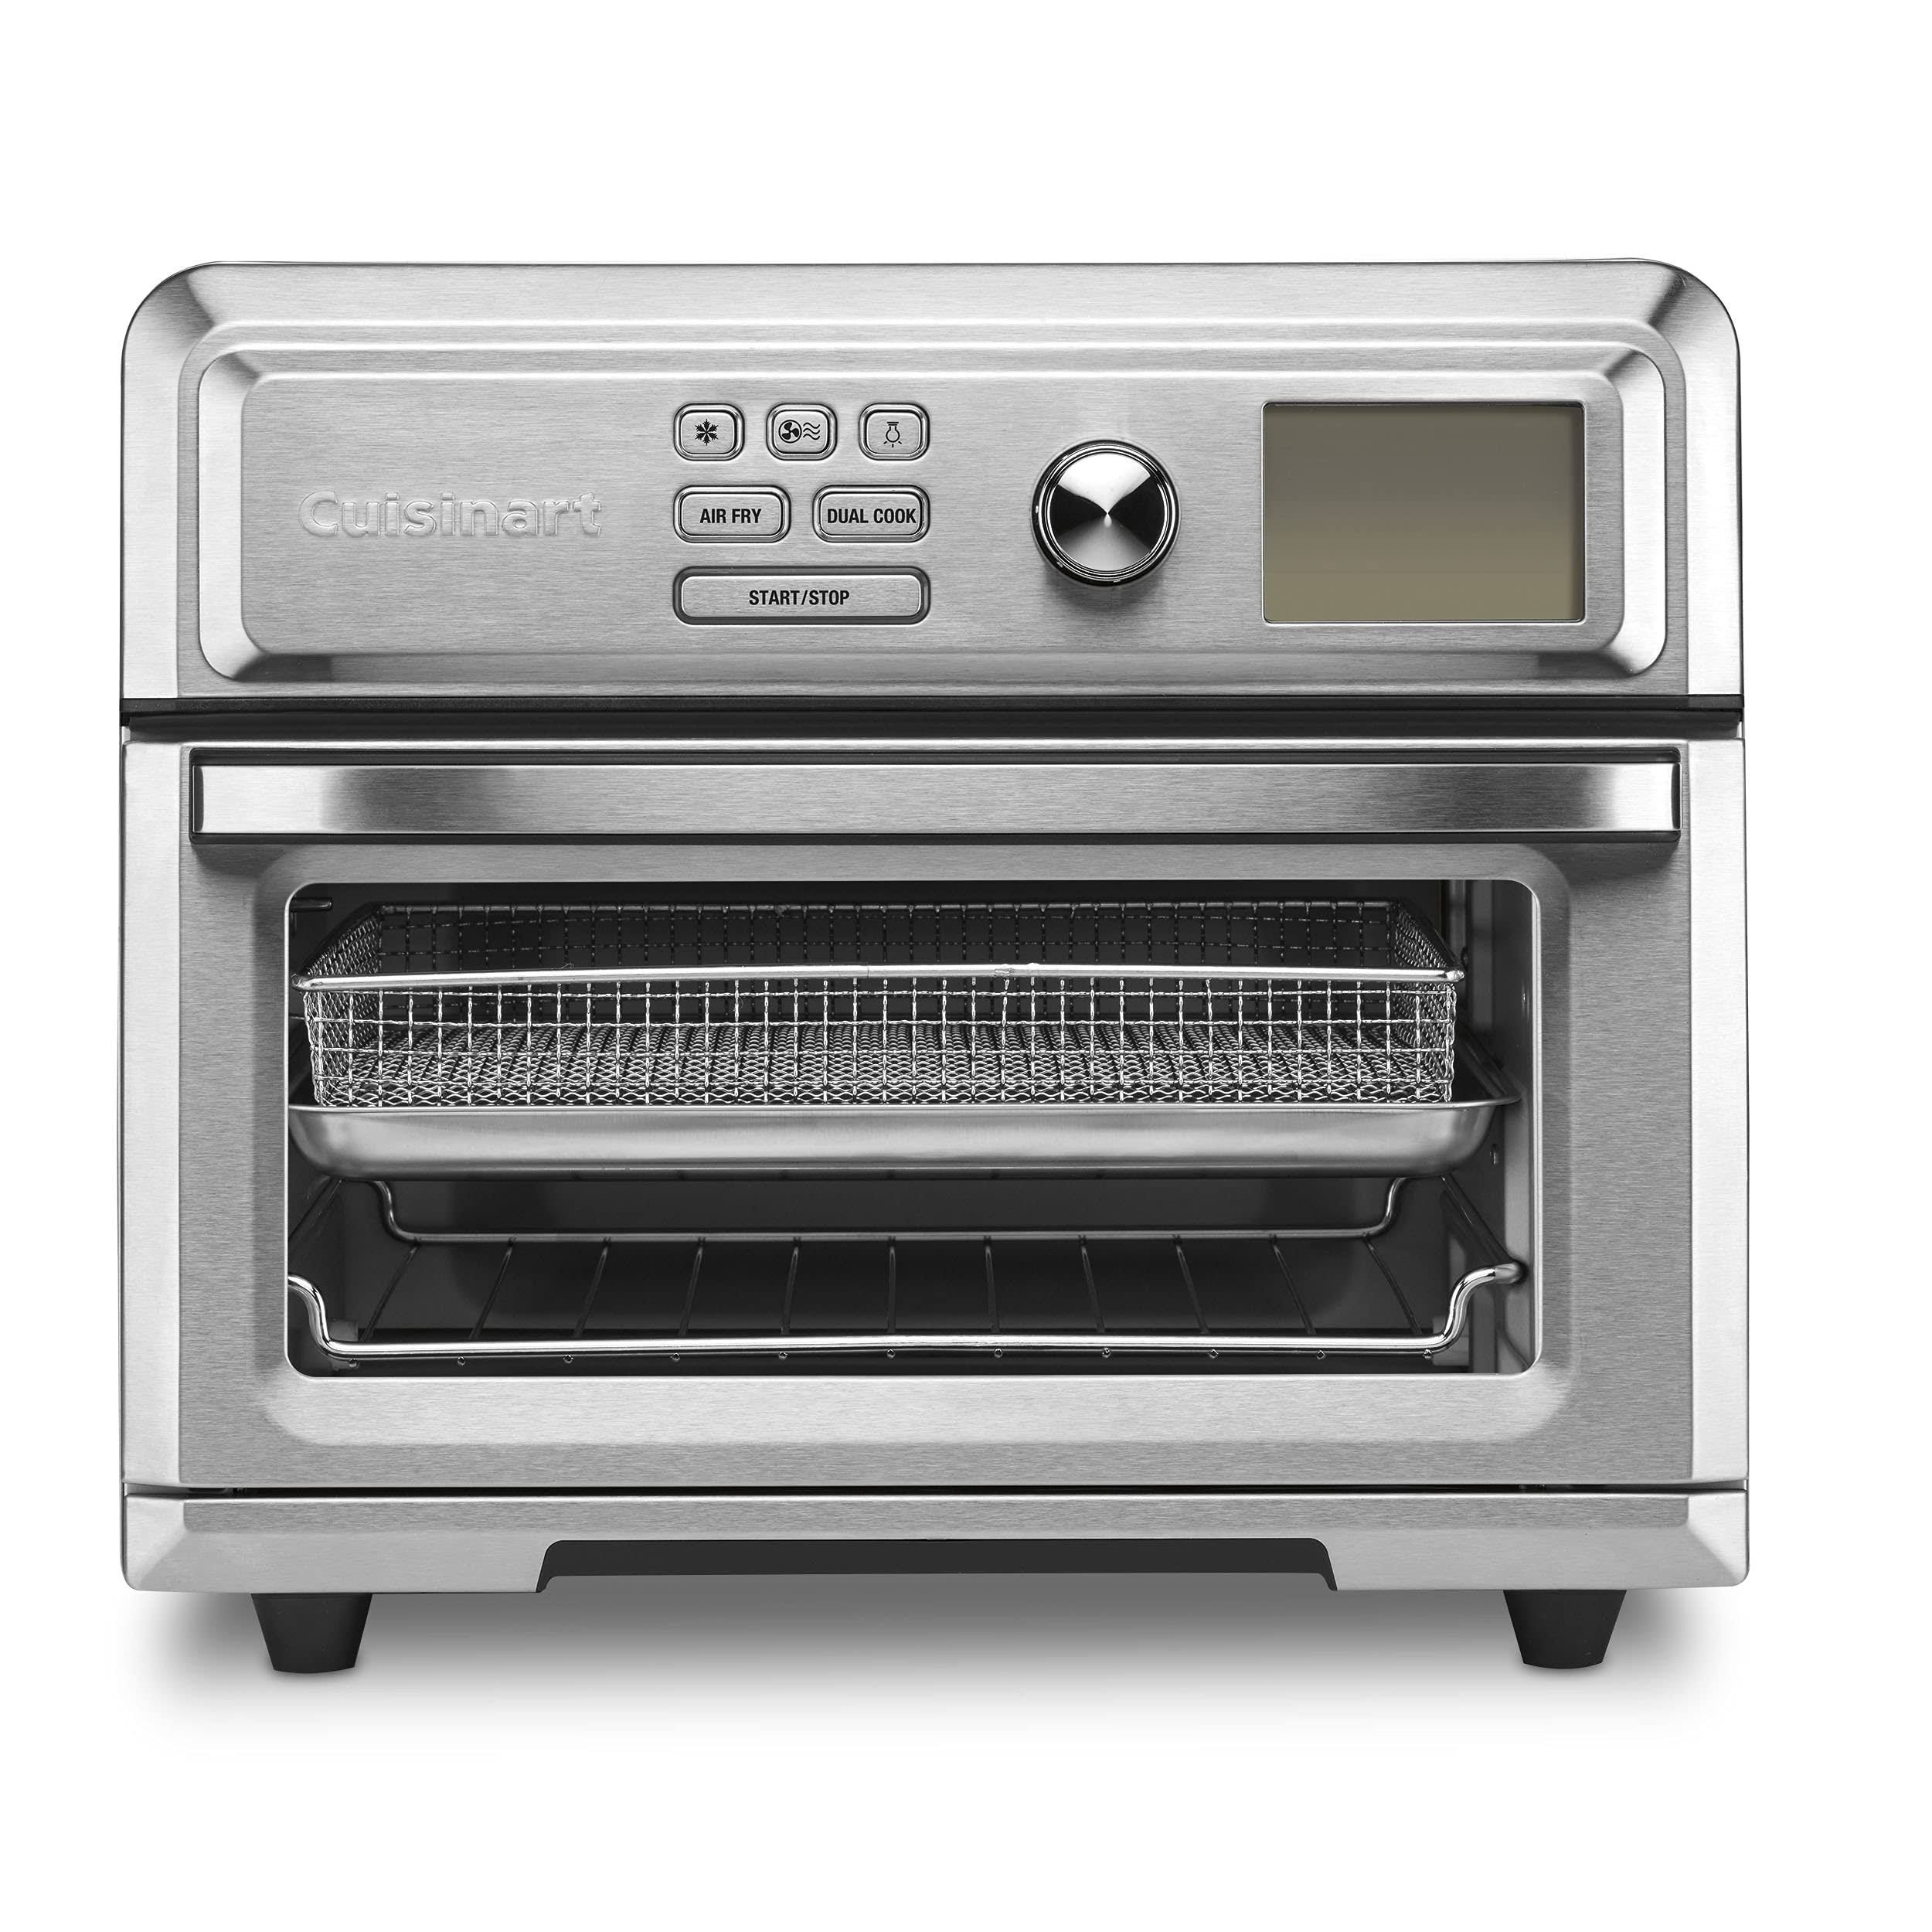 Cuisinart Digital AirFryer Toaster Oven with Wide Range of Cooking Functions | Image